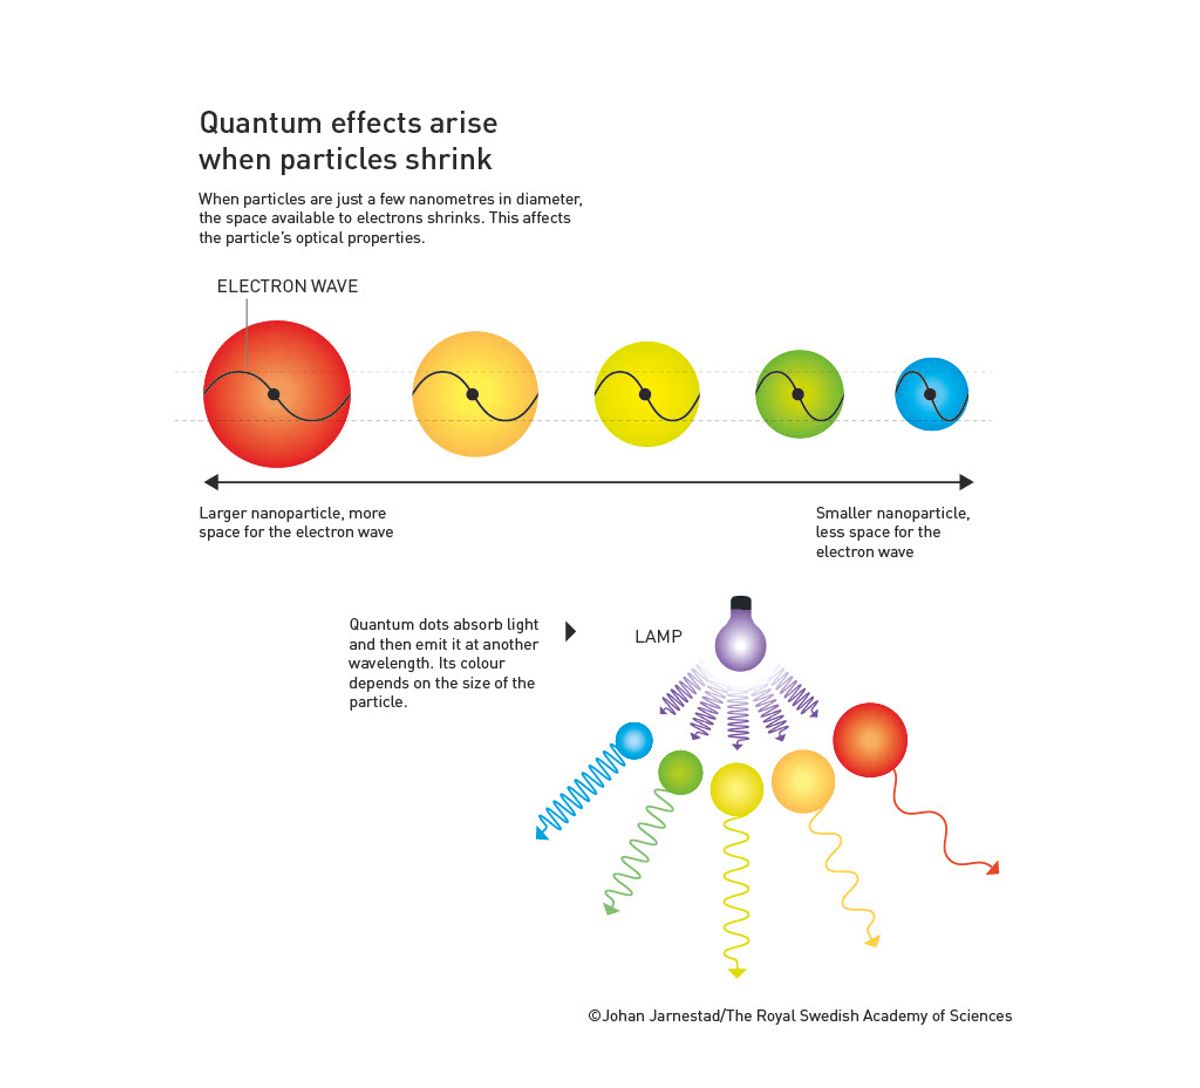 Circles of varying sizes and colors demonstrate how quantum dots change from red when they are large to blue when they are small.